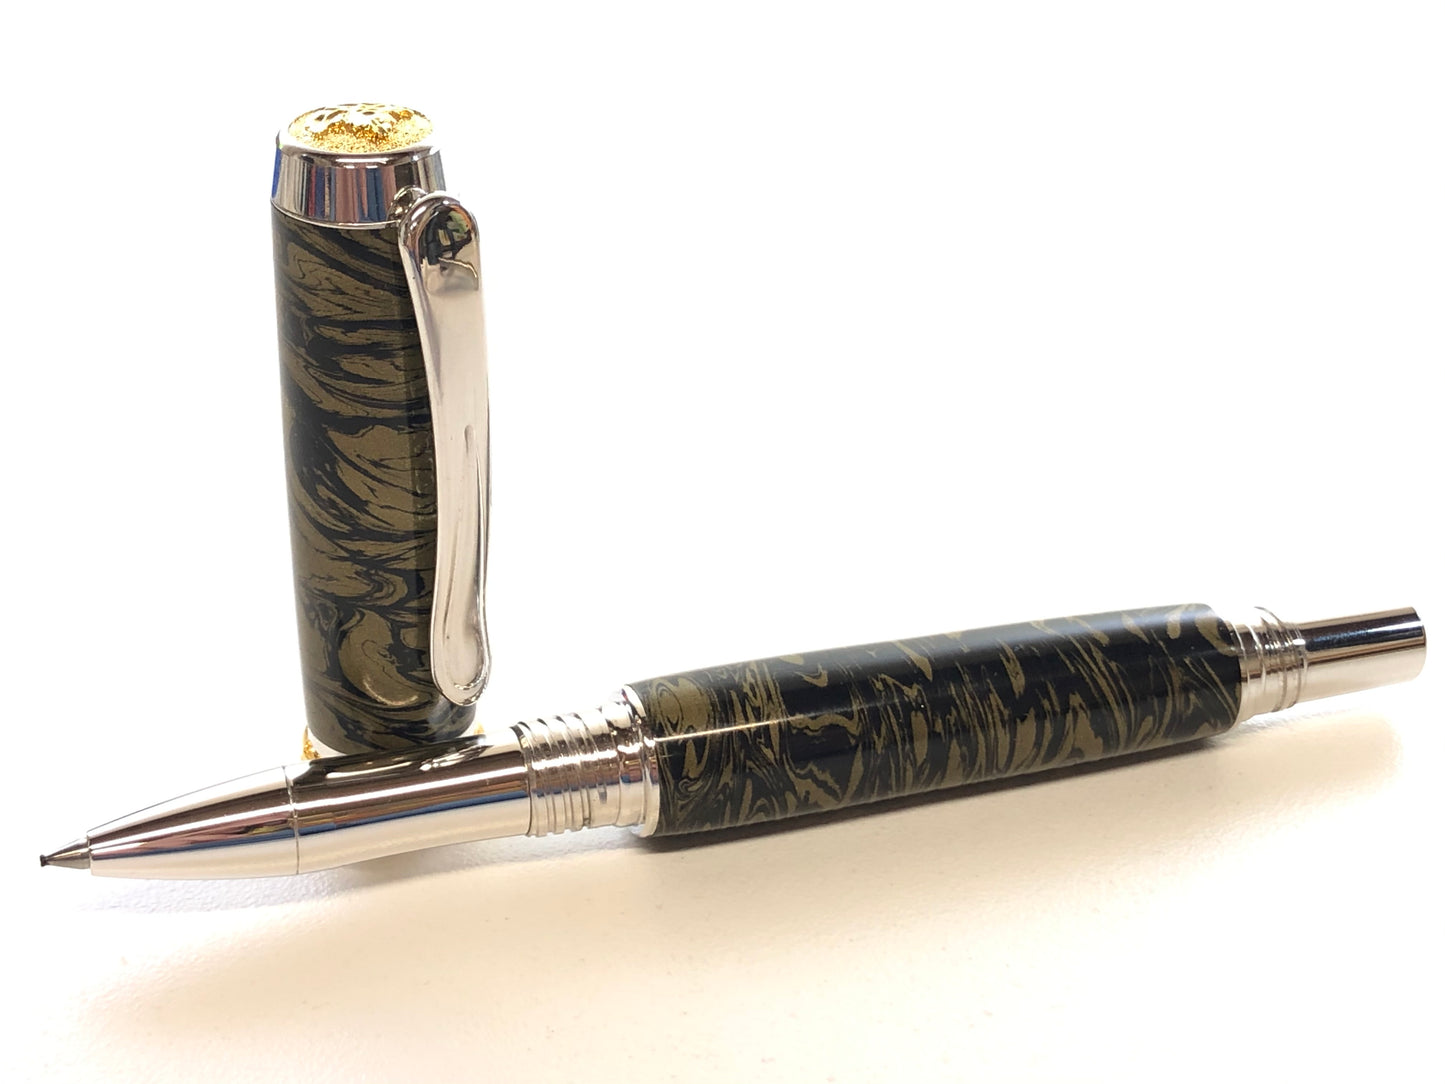 Aaron Rollerball / Rhodium and Gold - Black Gold M3 Metal Composite